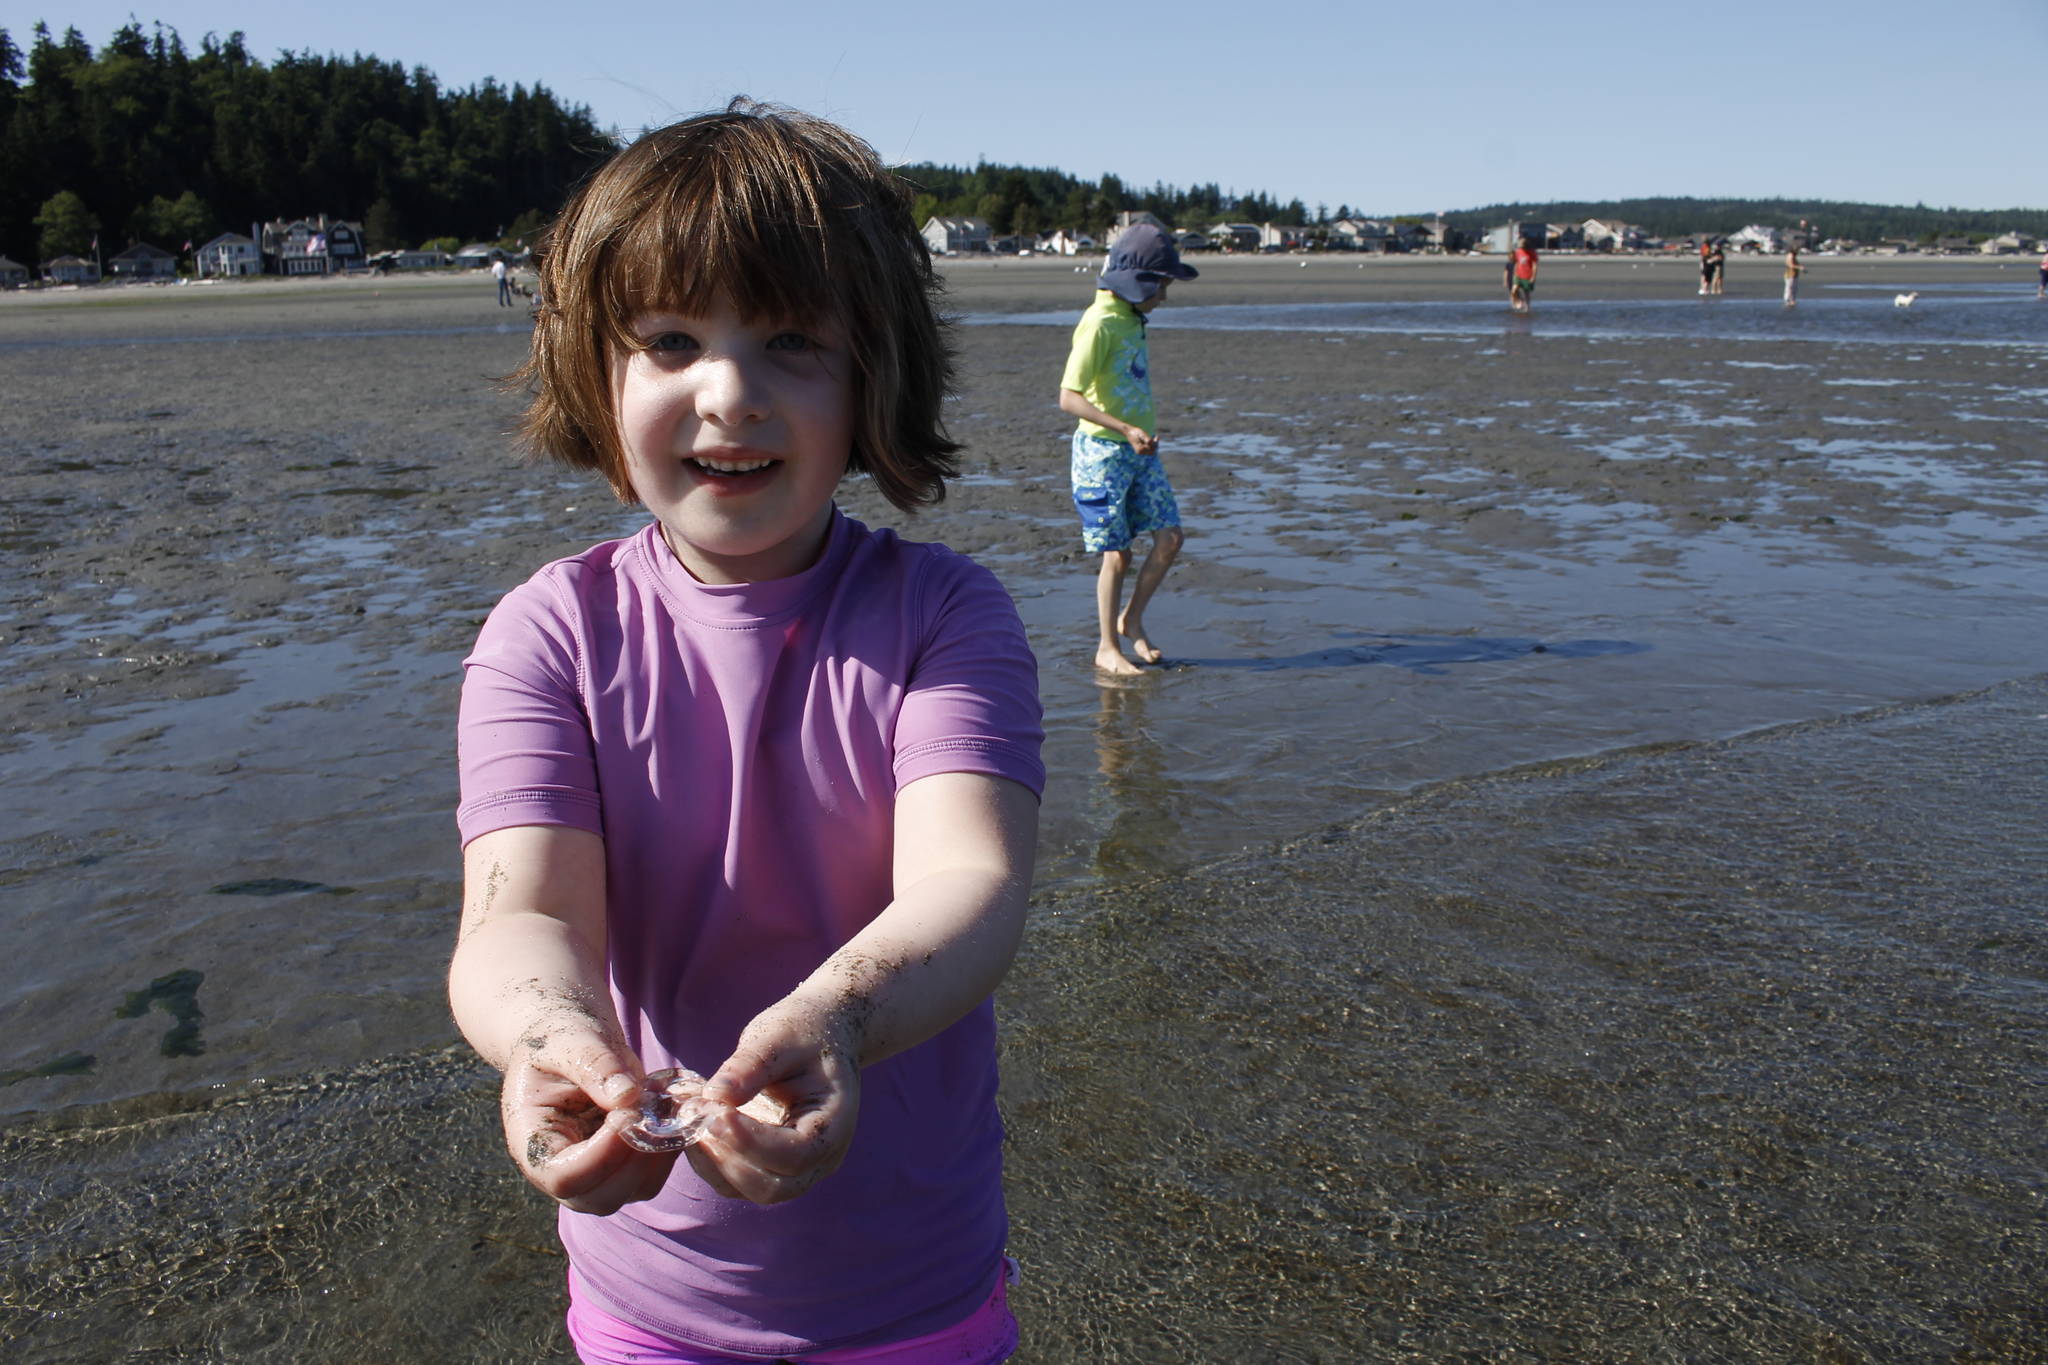 While enjoying the sunny weather Wednesday at the public beach at Double Bluff in Freeland, Grey Fortney, 7, shows off a jellyfish she collected to release back into the water. (Photos by Kira Erickson/South Whidbey Record)